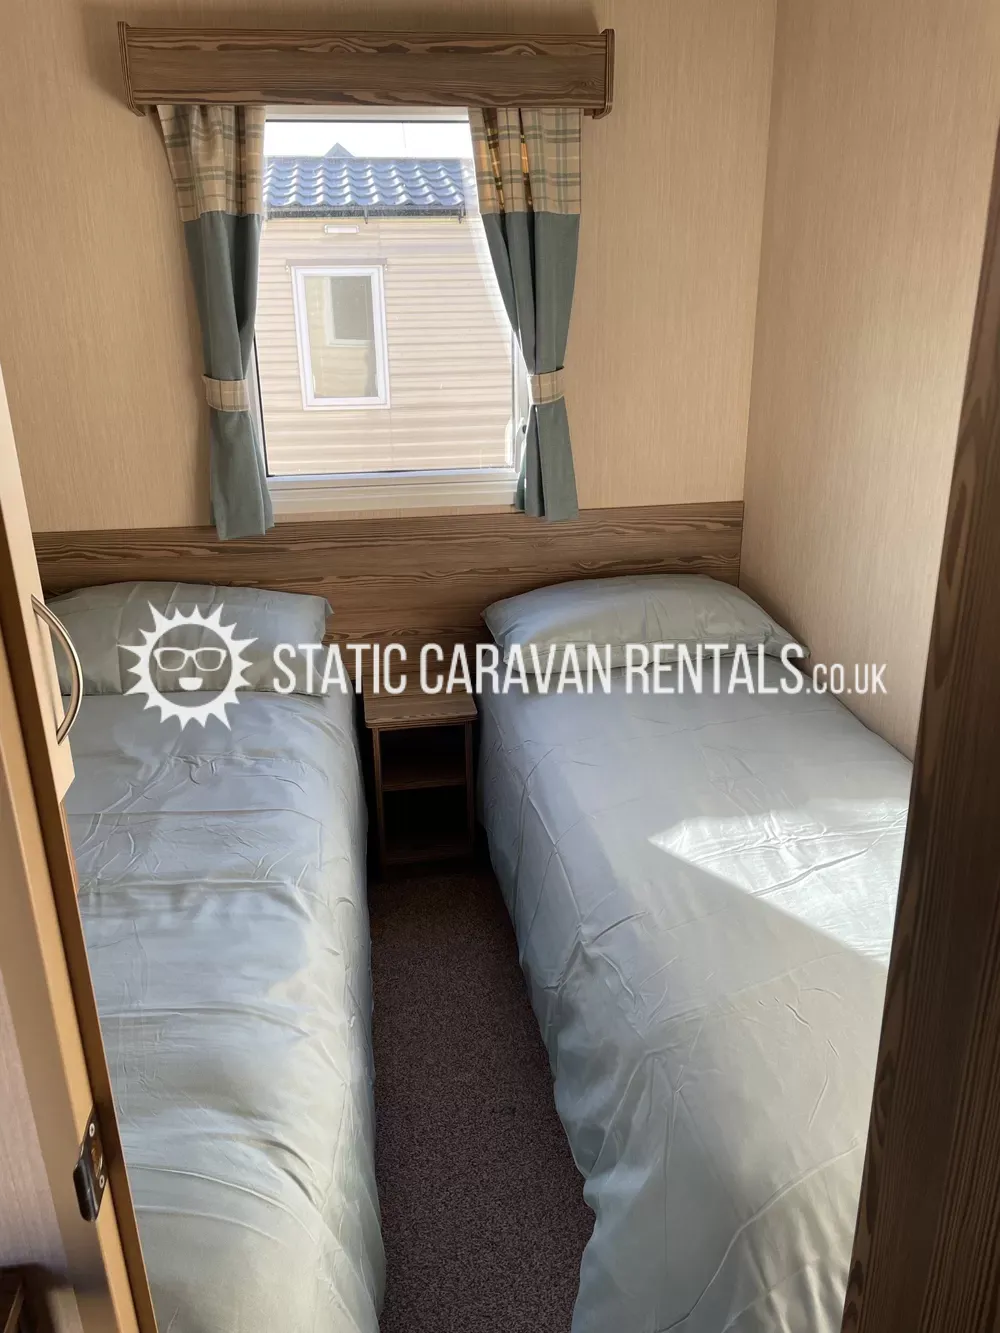 5 Private Carvan for Hire Combe Haven, St Leonards on Sea,Hastings, Sussex, England